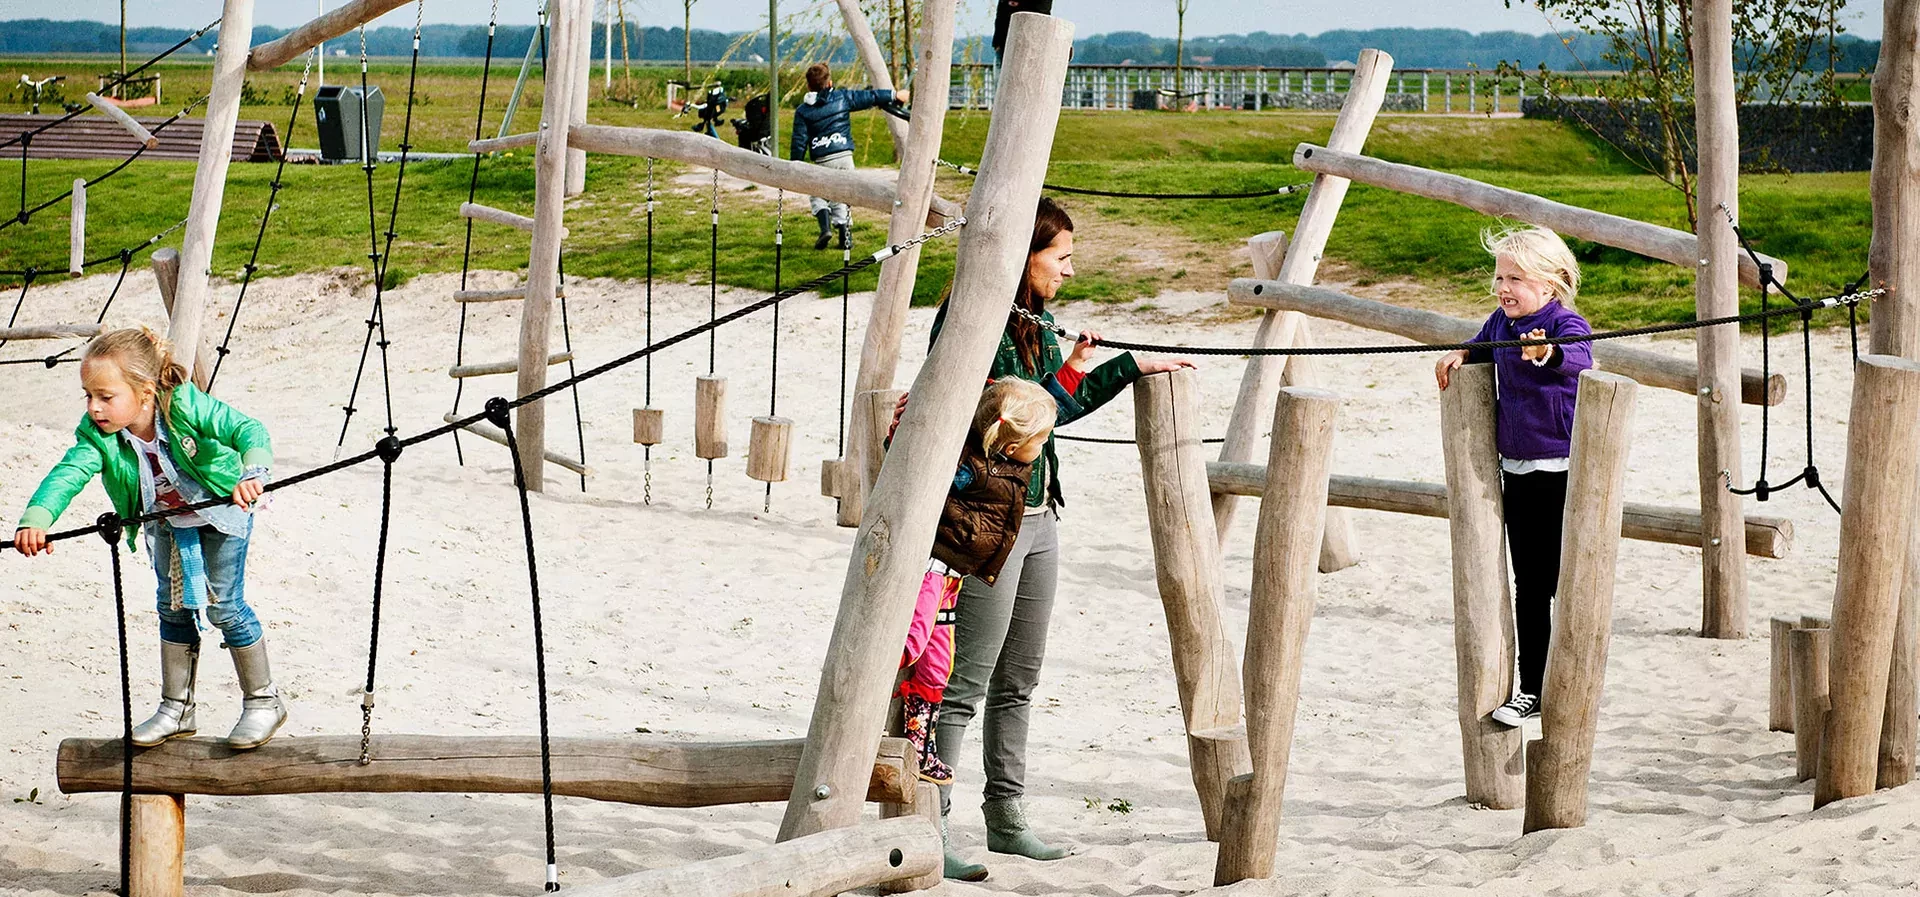 children playing on a wooden obstacle course playground hero image